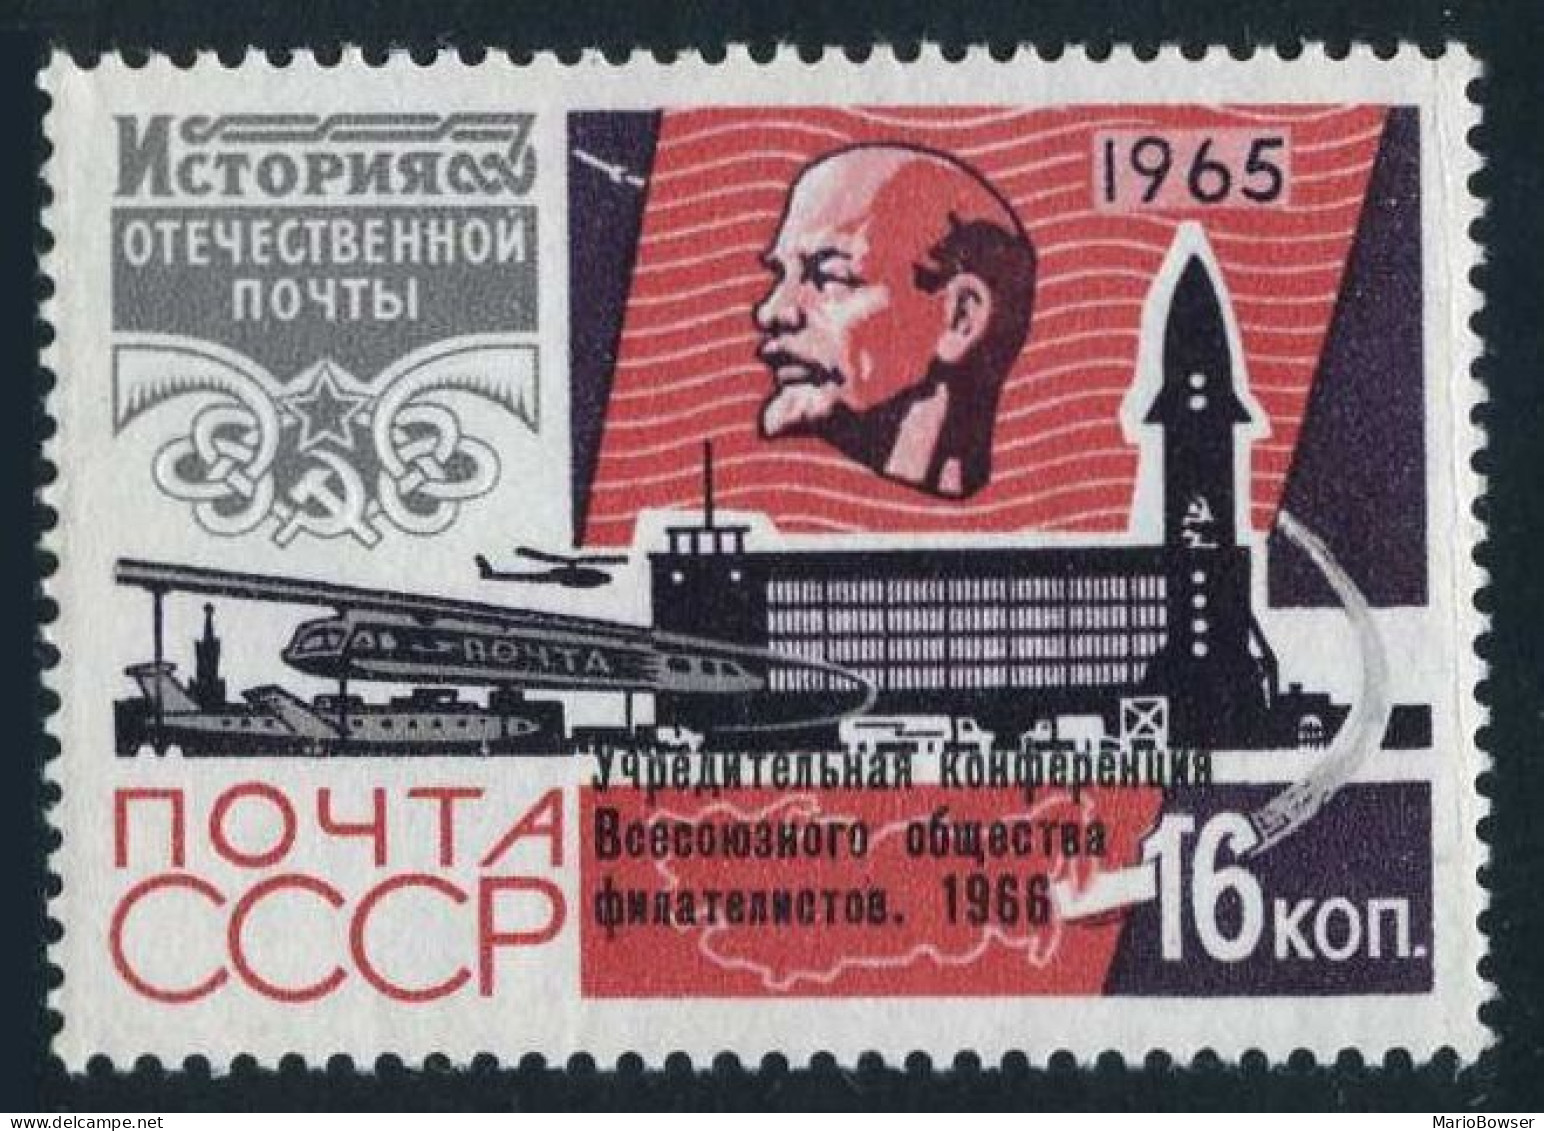 Russia 3175,MNH.Michel 3192. All-Union Society Of Philatelists,1966.Lenin,Rocket - Unused Stamps